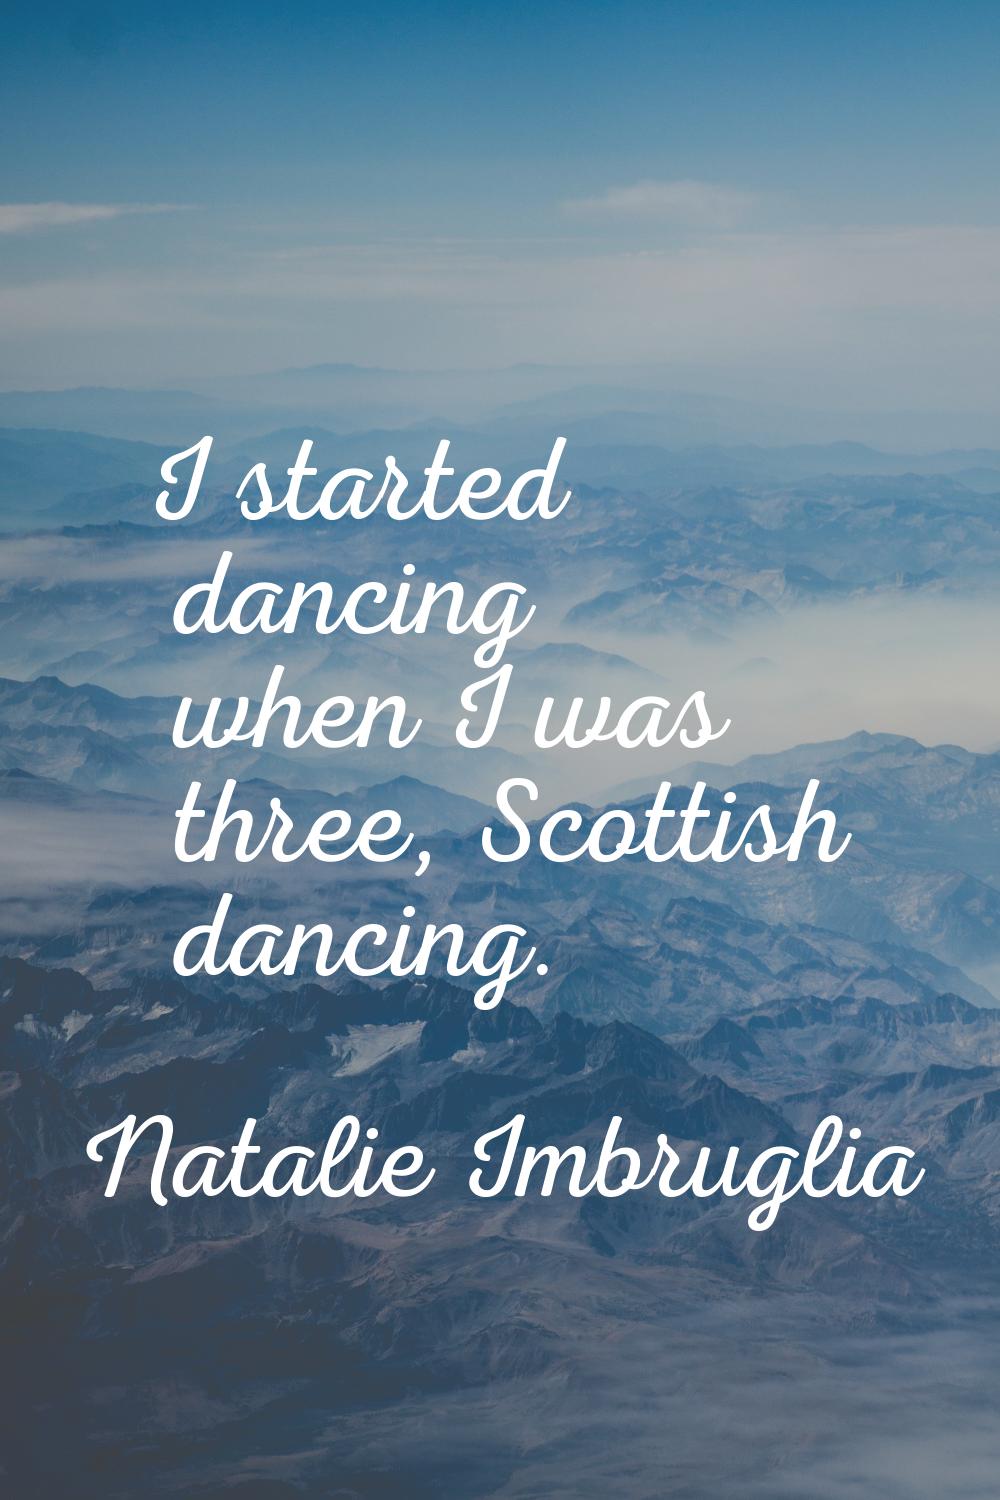 I started dancing when I was three, Scottish dancing.